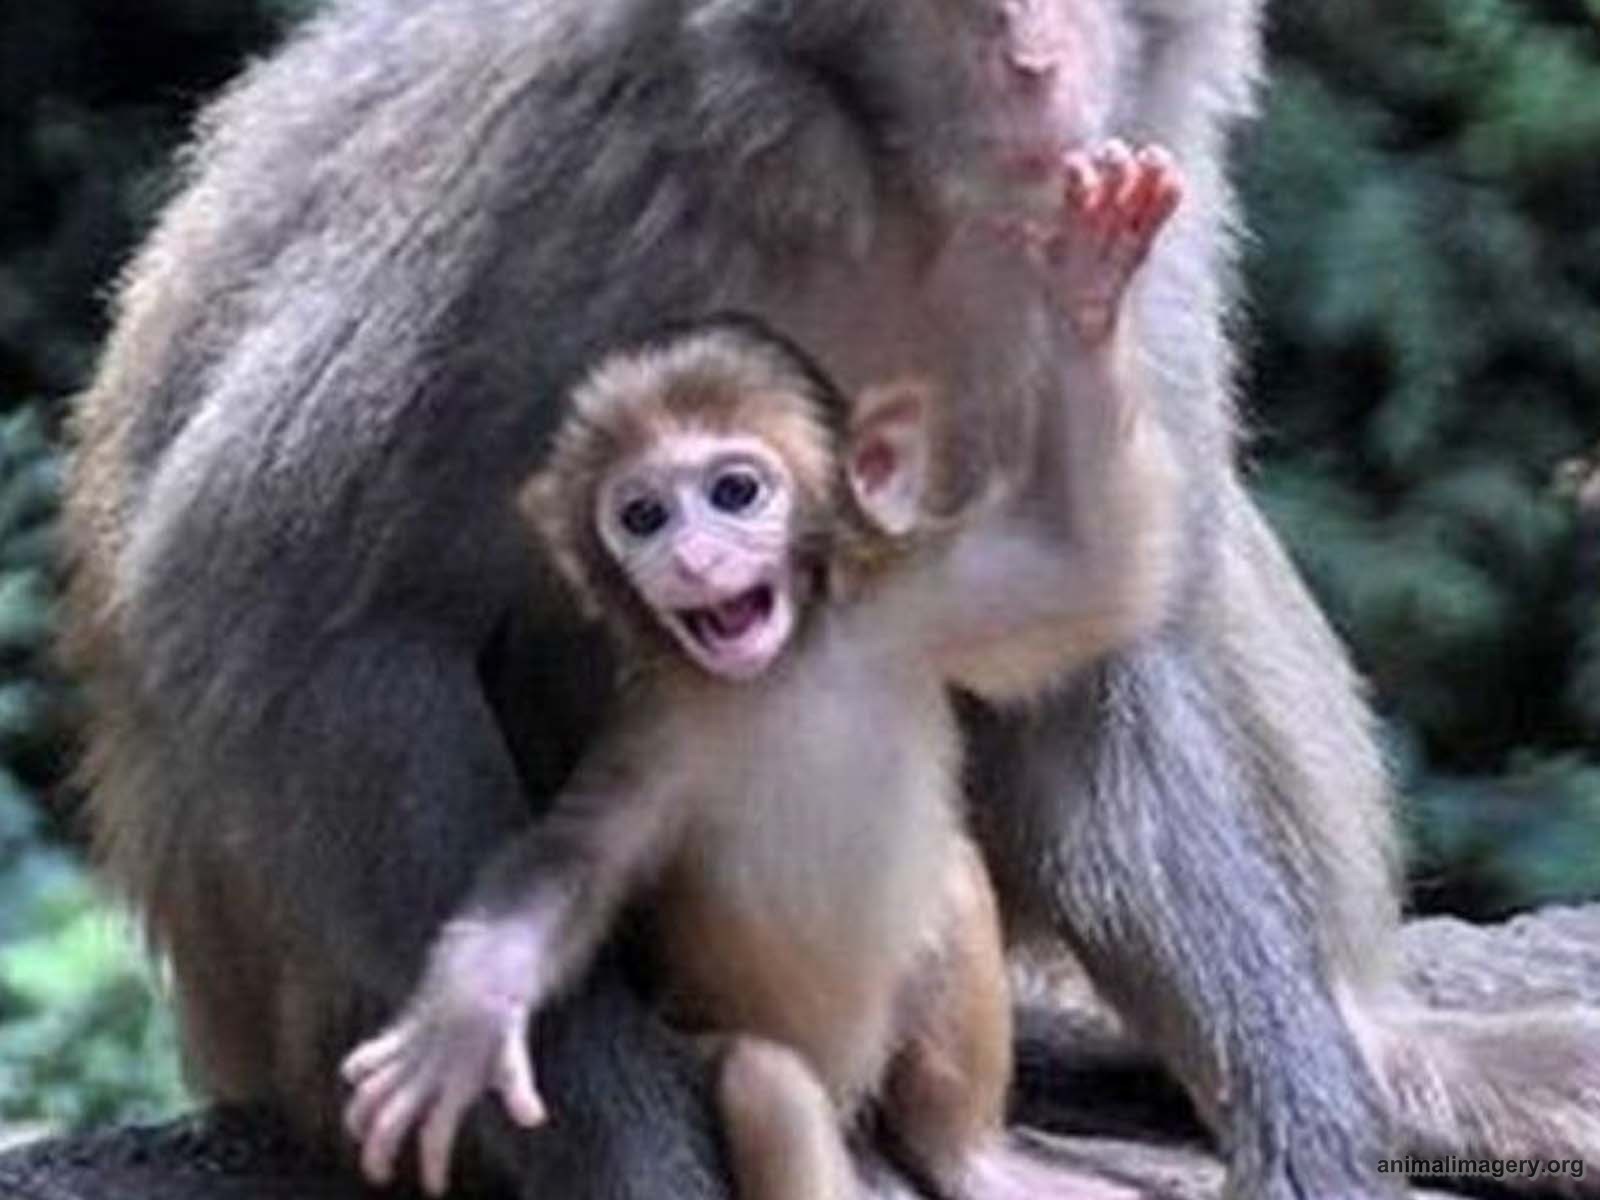 Cute Baby Monkeys Images Crazy Gallery